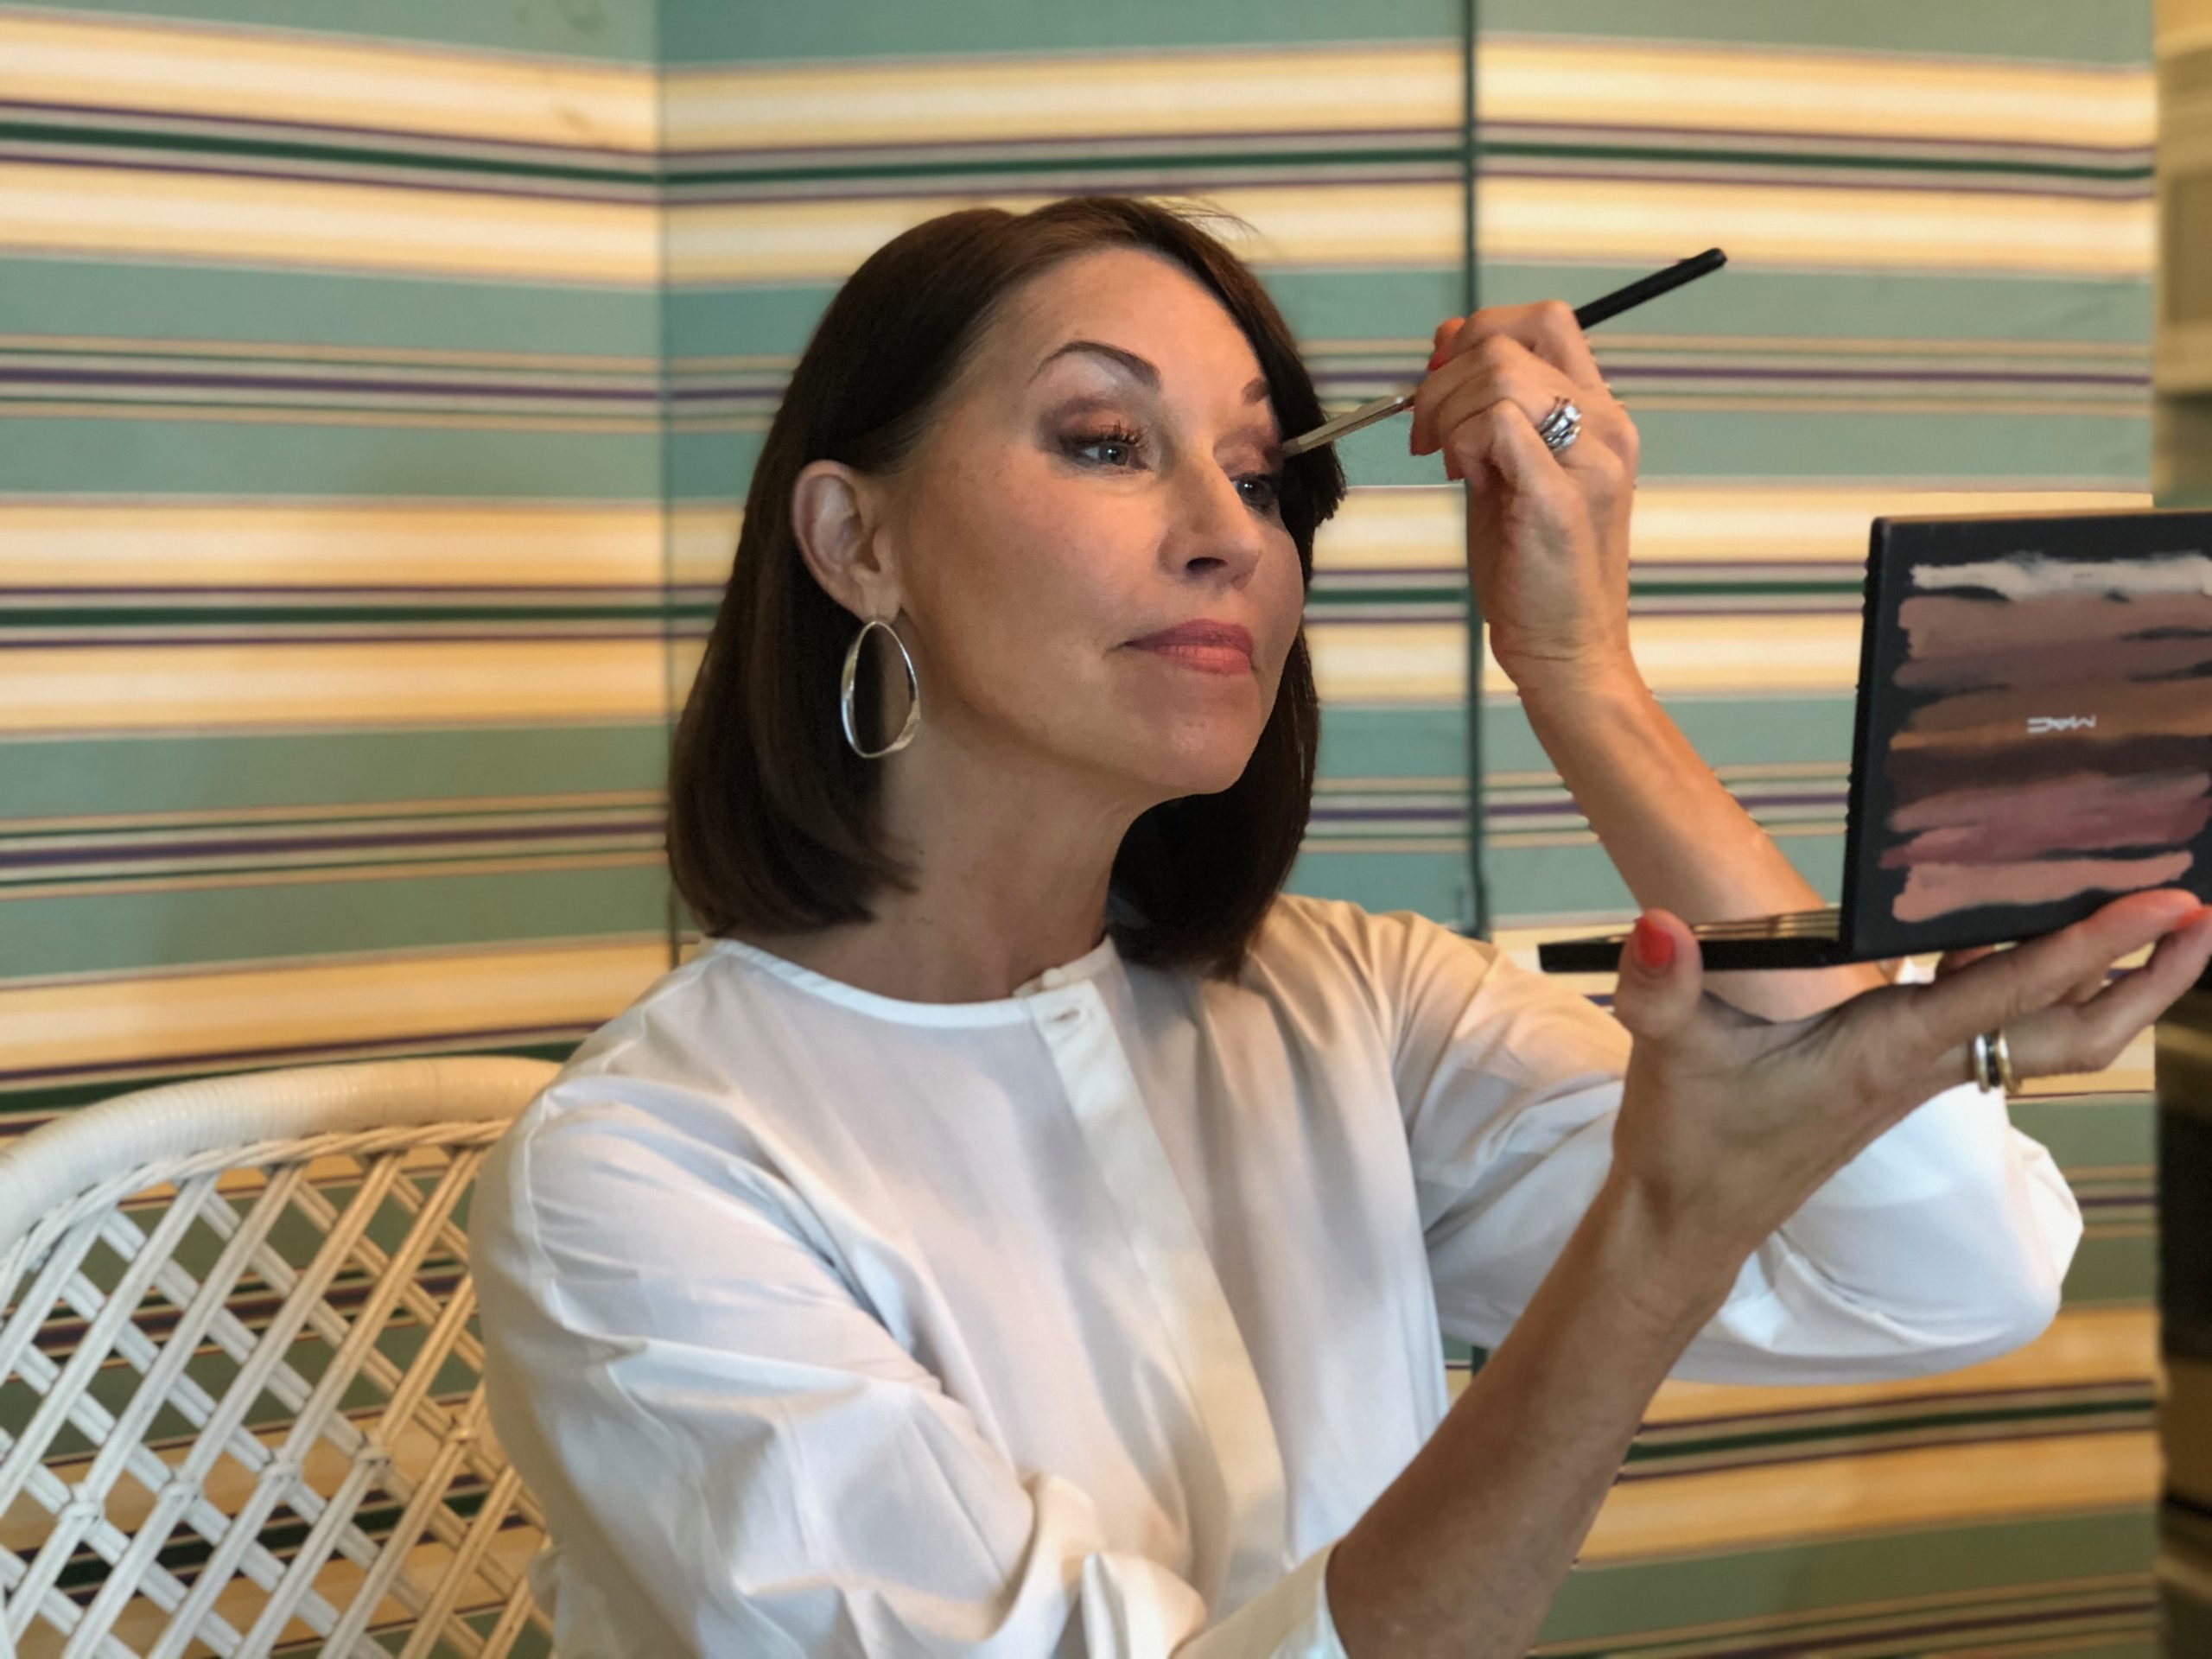 Woman with brown hair wearing a white shirt putting on makeup